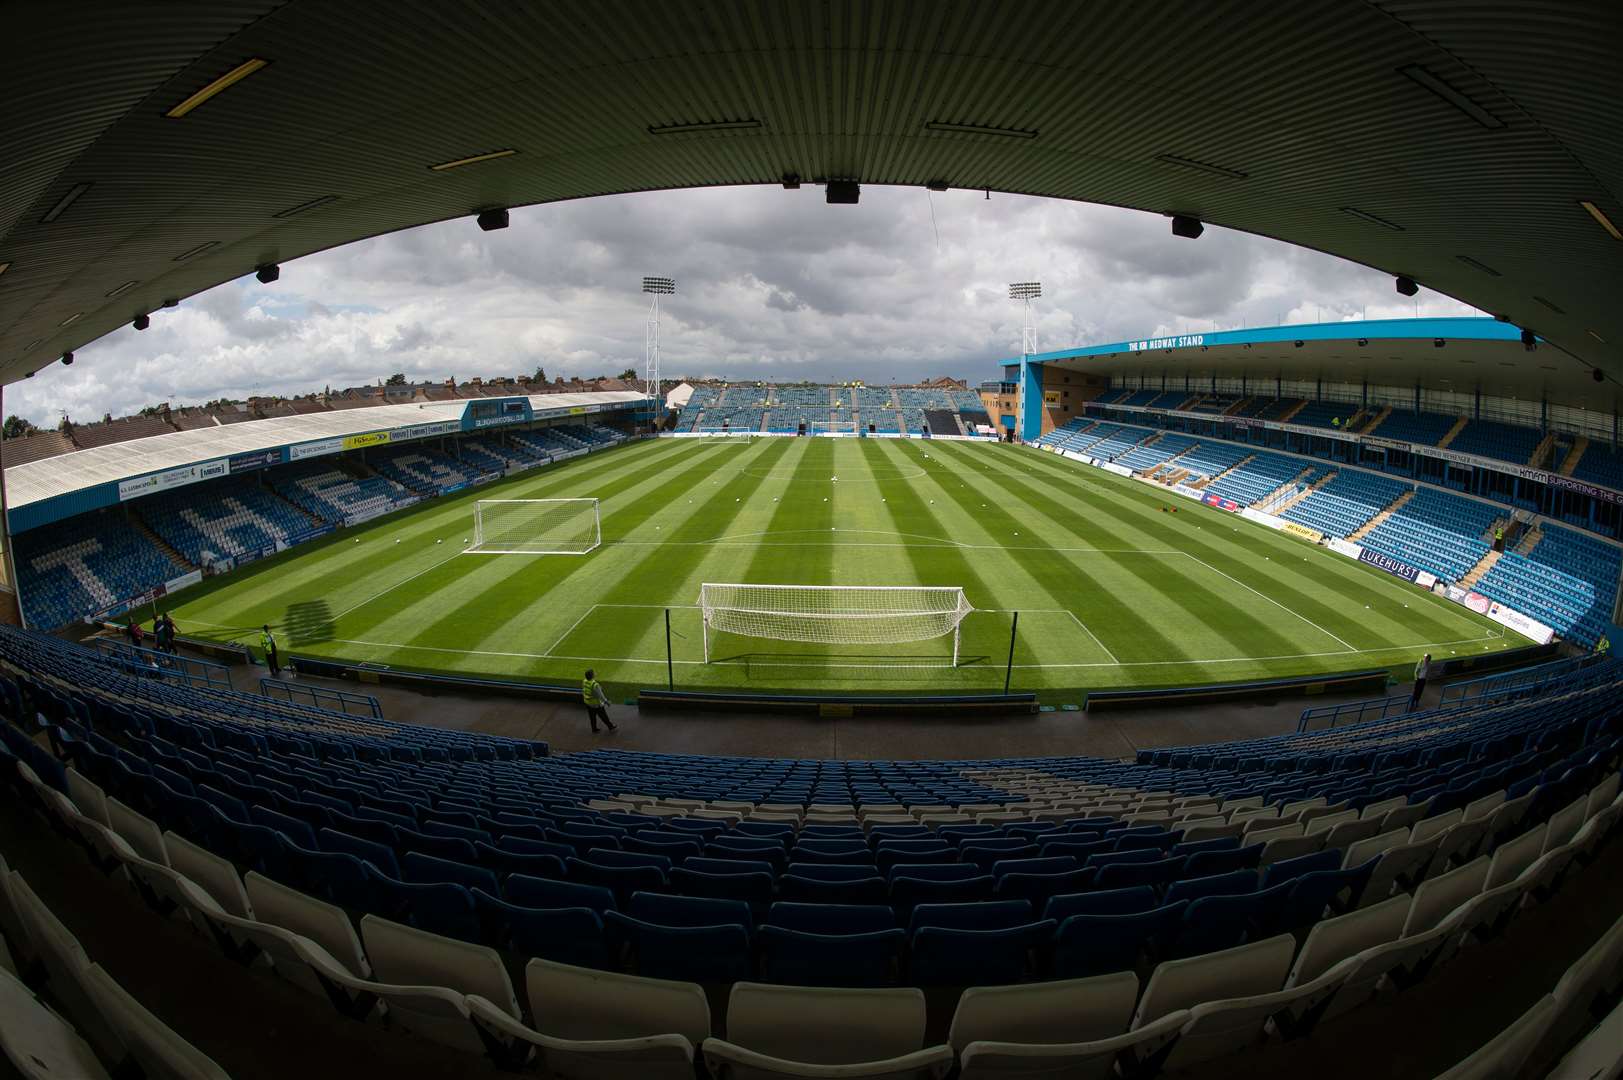 Priestfield Stadium has been offered for use as a vaccine hub